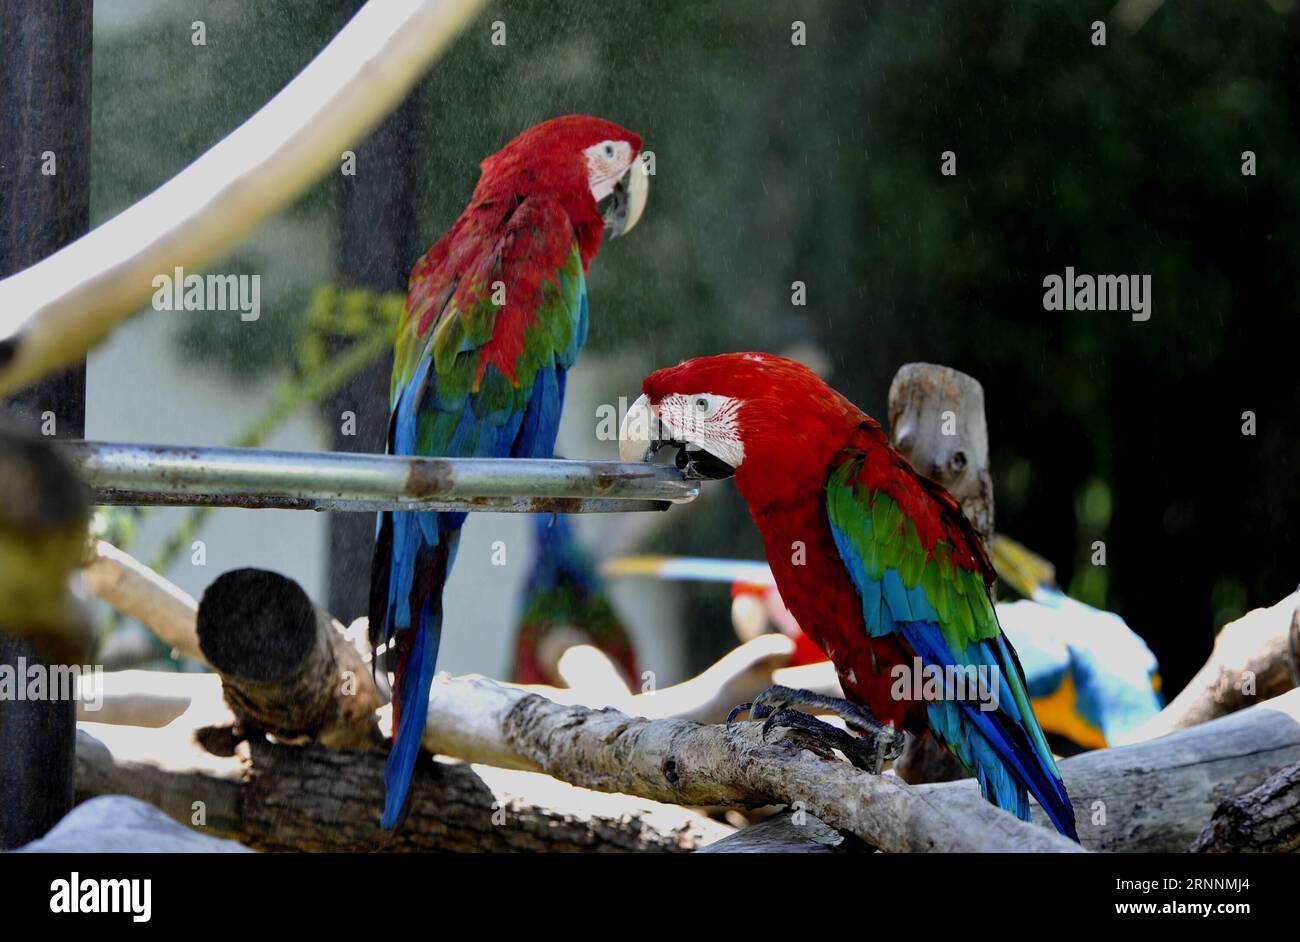 (170721) -- SHANGHAI, July 21, 2017 -- Scarlet macaws enjoy spray-cooling at Shanghai Zoo in east China s Shanghai, July 21, 2017. The meteorological department of east China metropolis Shanghai recorded an air temperature of 40.9 degrees Celsius (105.6 degrees Fahrenheit) at around 2 p.m. Friday, the highest on record in the city in 145 years. The Shanghai Zoo has took many measures to keep the animals cool. ) (lb) CHINA-SHANGHAI-ANIMAL-SUMMER HEAT (CN) ZhangxJiansong PUBLICATIONxNOTxINxCHN   Shanghai July 21 2017 Scarlet macaws Enjoy Spray Cooling AT Shanghai Zoo in East China S Shanghai Jul Stock Photo